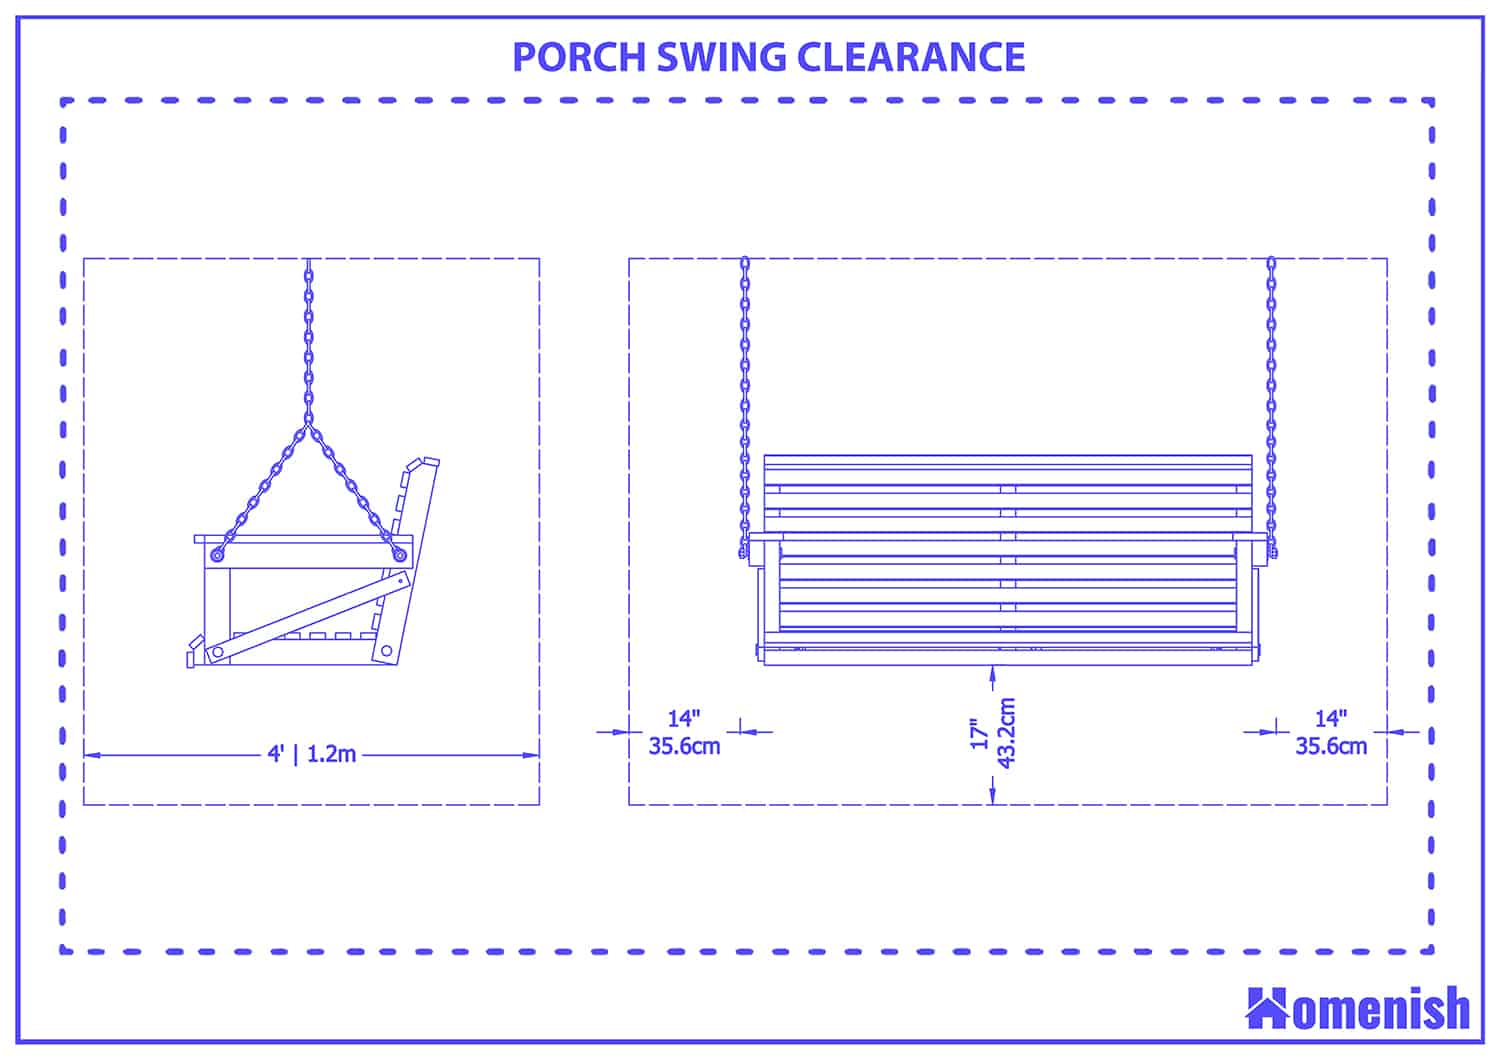 Porch swing clearance